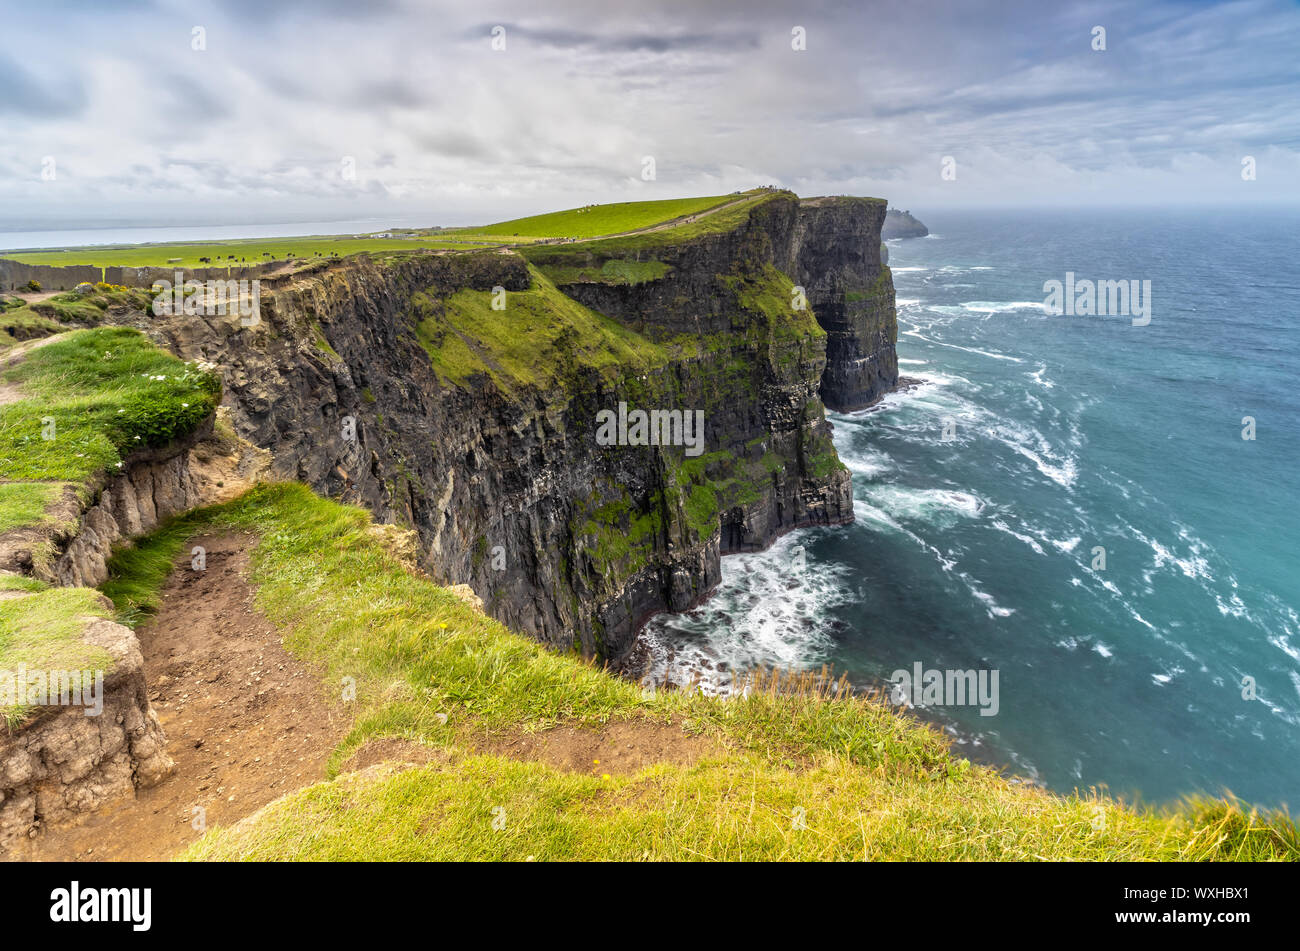 The Cliffs of Moher in Ireland Stock Photo